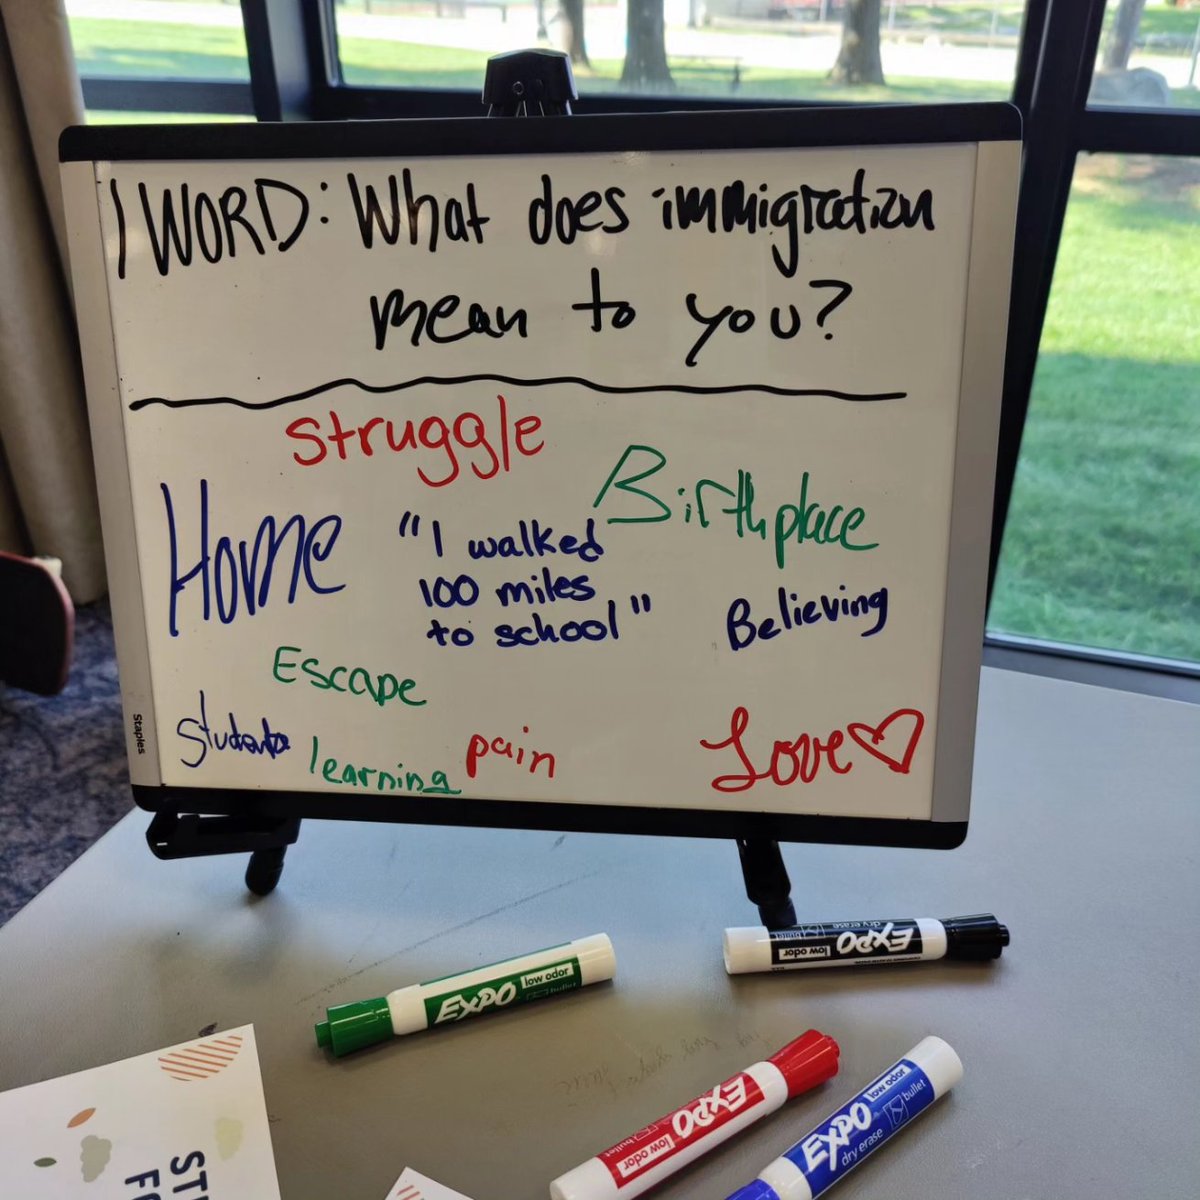 One of our favorite practices at events and during recruitment is asking people to reflect on immigration: what does it mean to you, what's one word that comes to why, why is immigrant justice important? We love seeing what people share

#immigration #immigrantjustice #immigrants